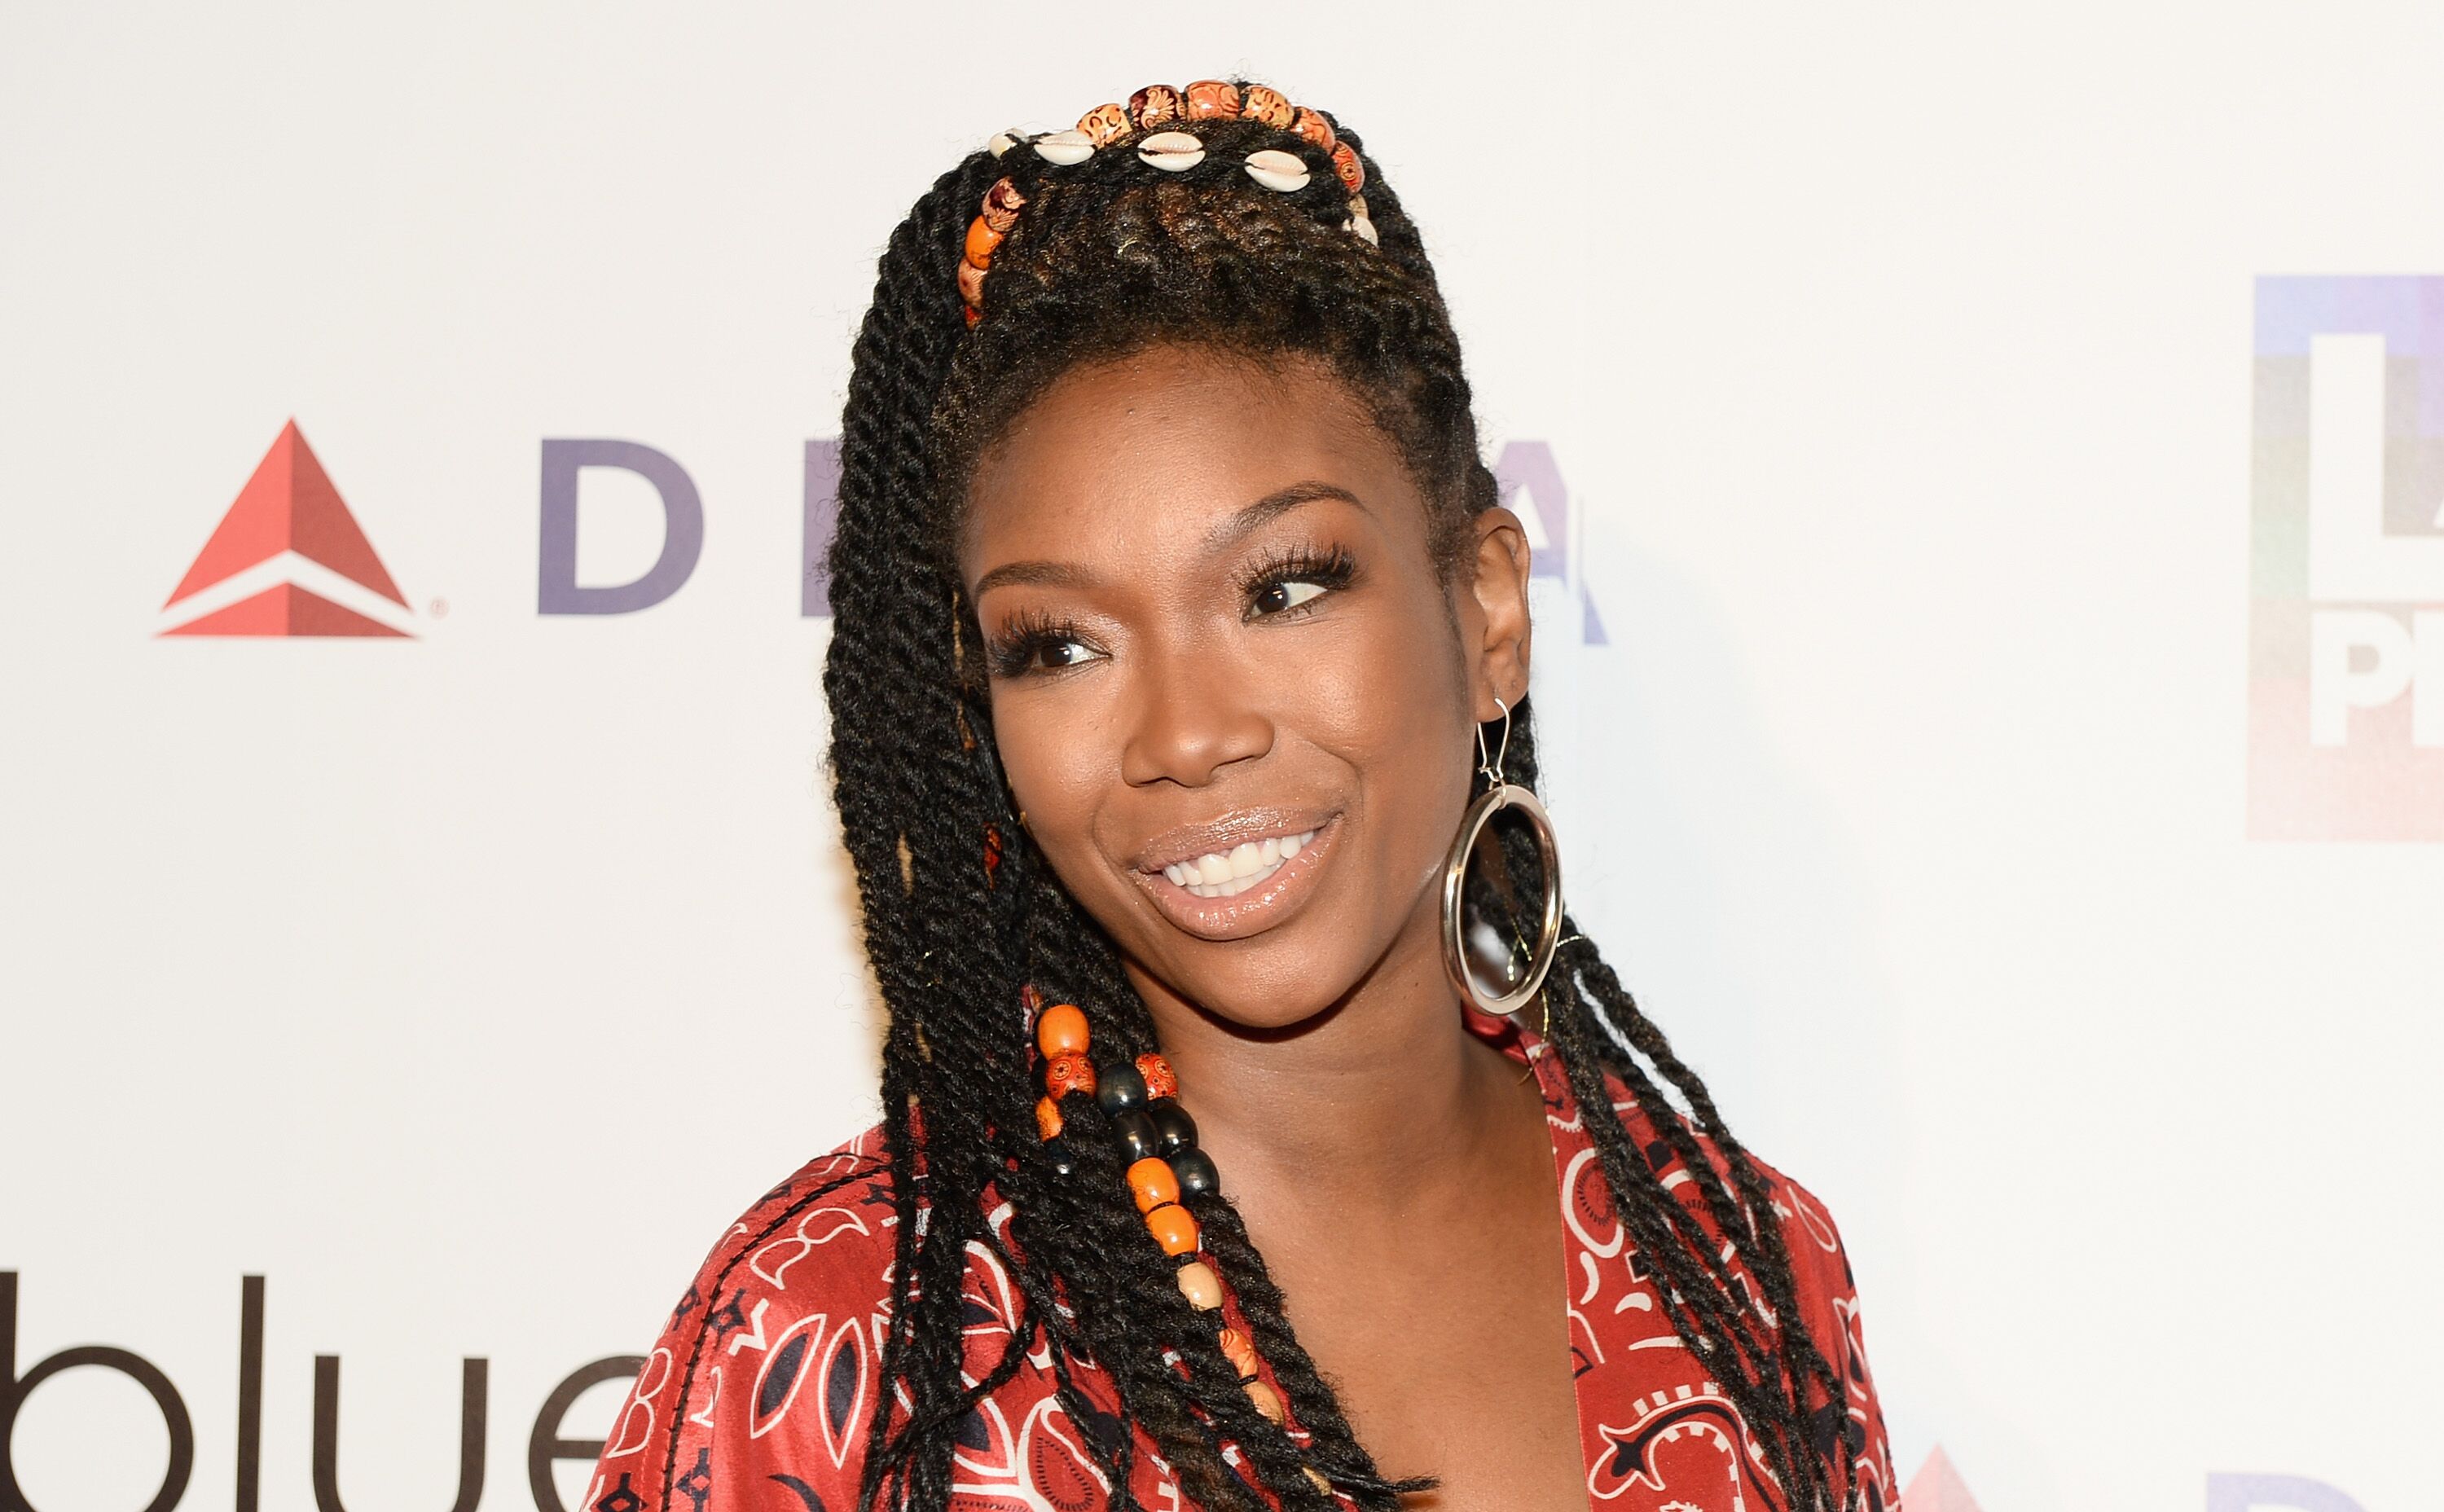 R&B singer Brandy attends the LA Pride Music Festival and Parade 2017 in Los Angeles, California. | Photo: Getty Images